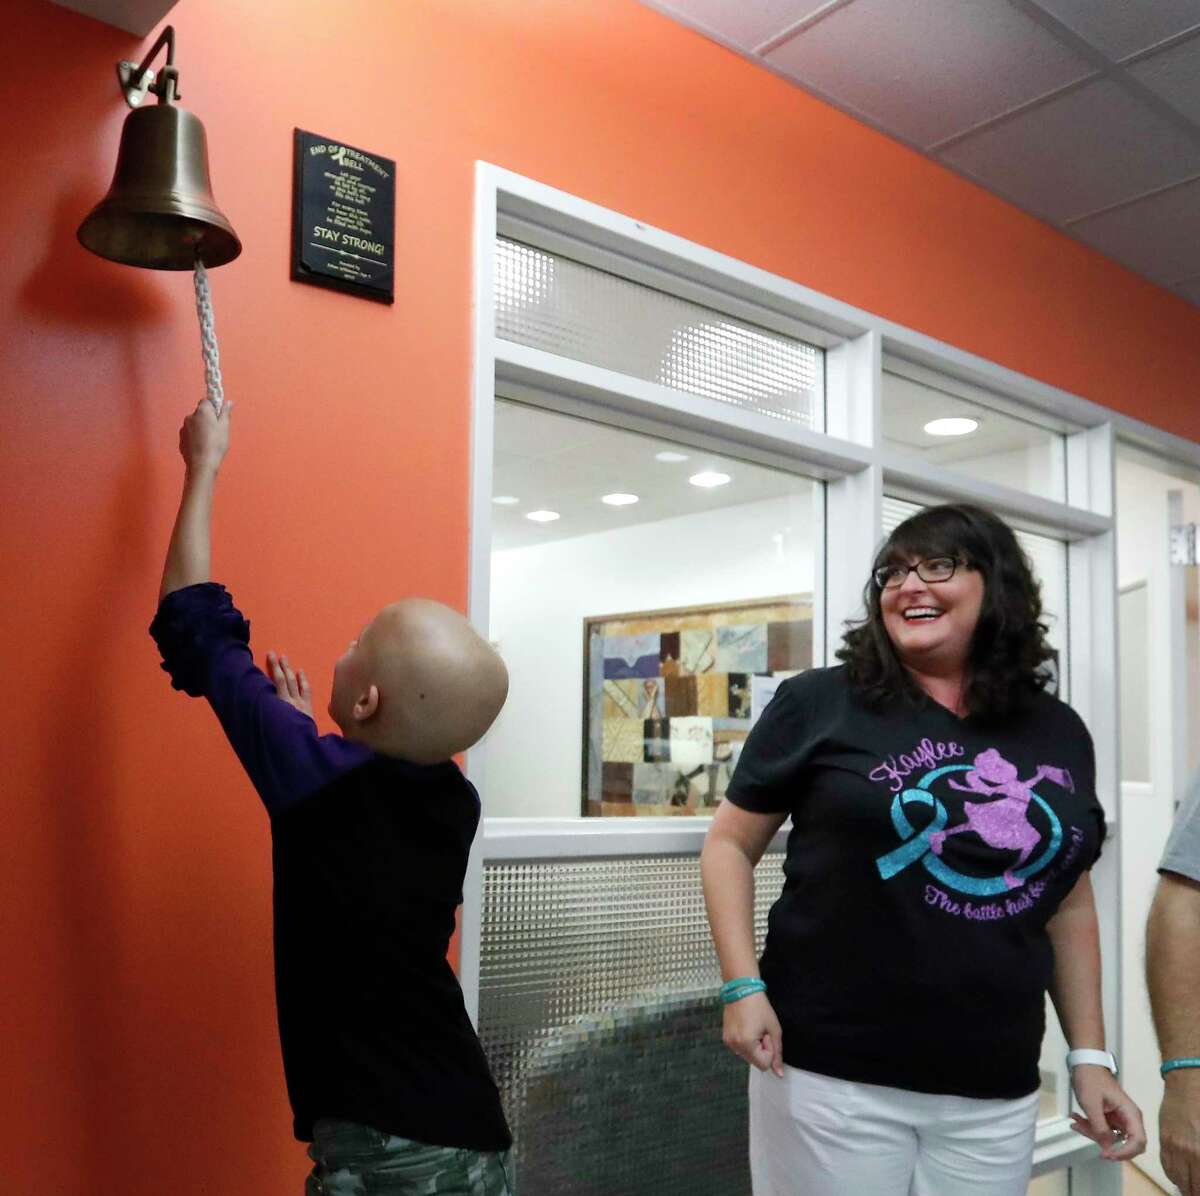 Kaylee Tolleson rings the bell at Texas Children’s Hospital signaling she has finished cancer treatment, July 25. The USMCA has the potential to introduce new biologics that would help treat cancer in patients.